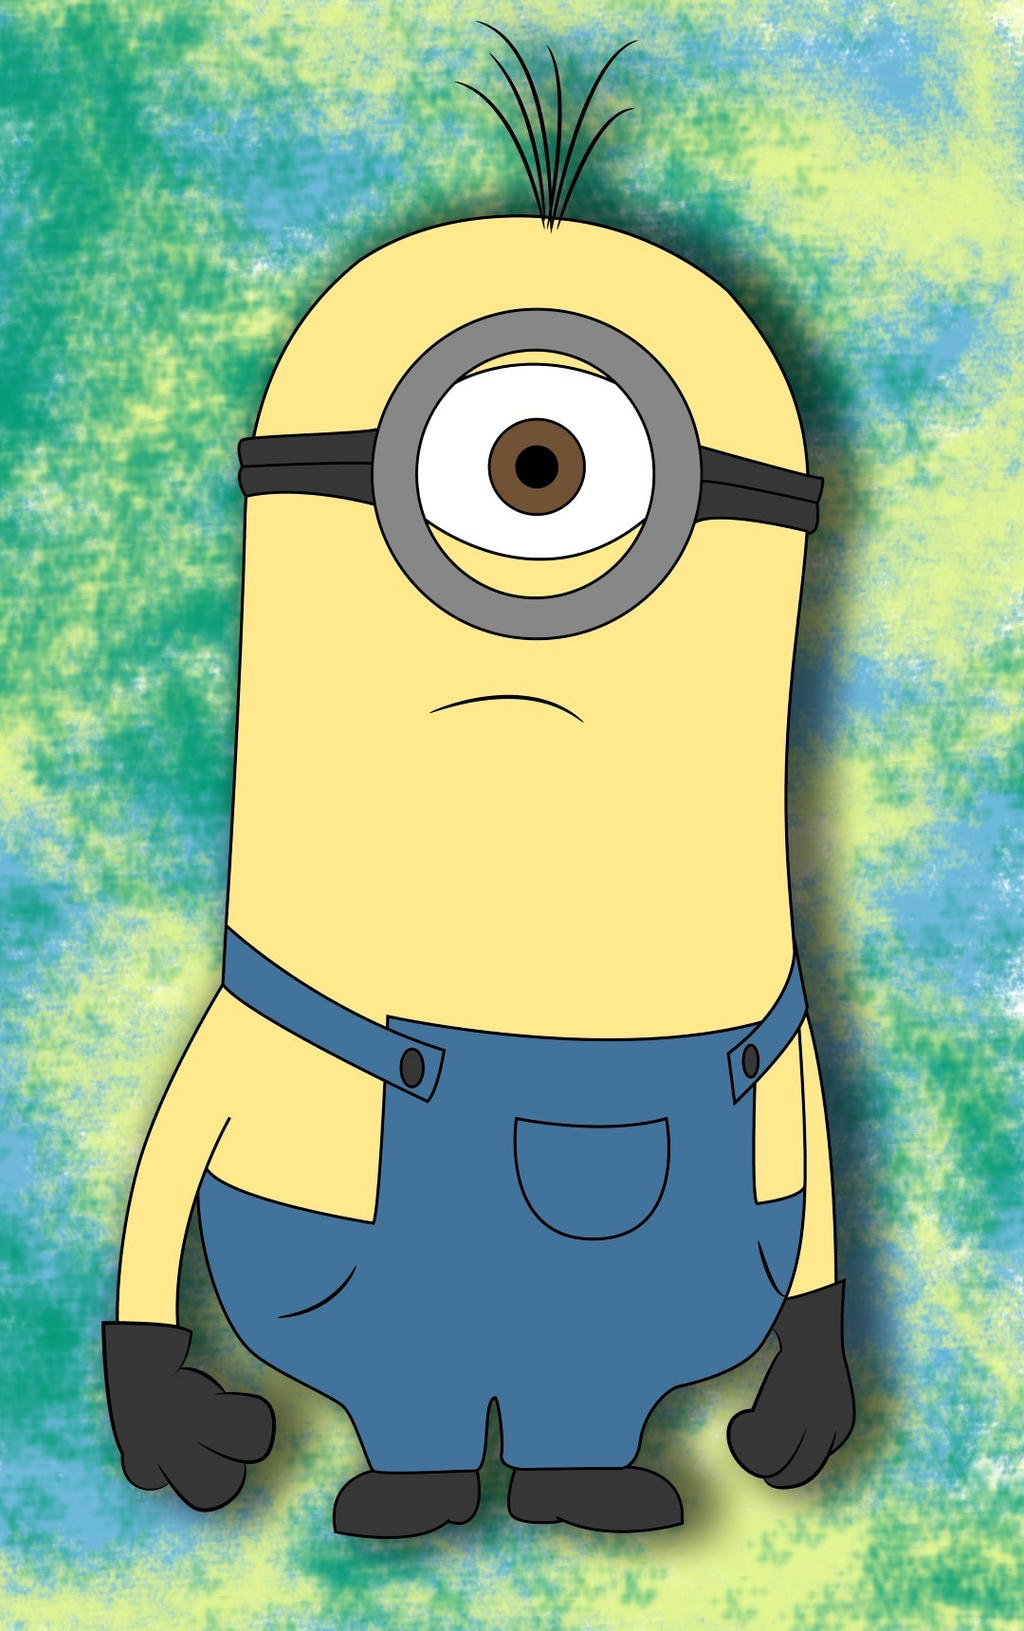 How To Draw Minion From Despicable Me by a-watt89 on DeviantArt